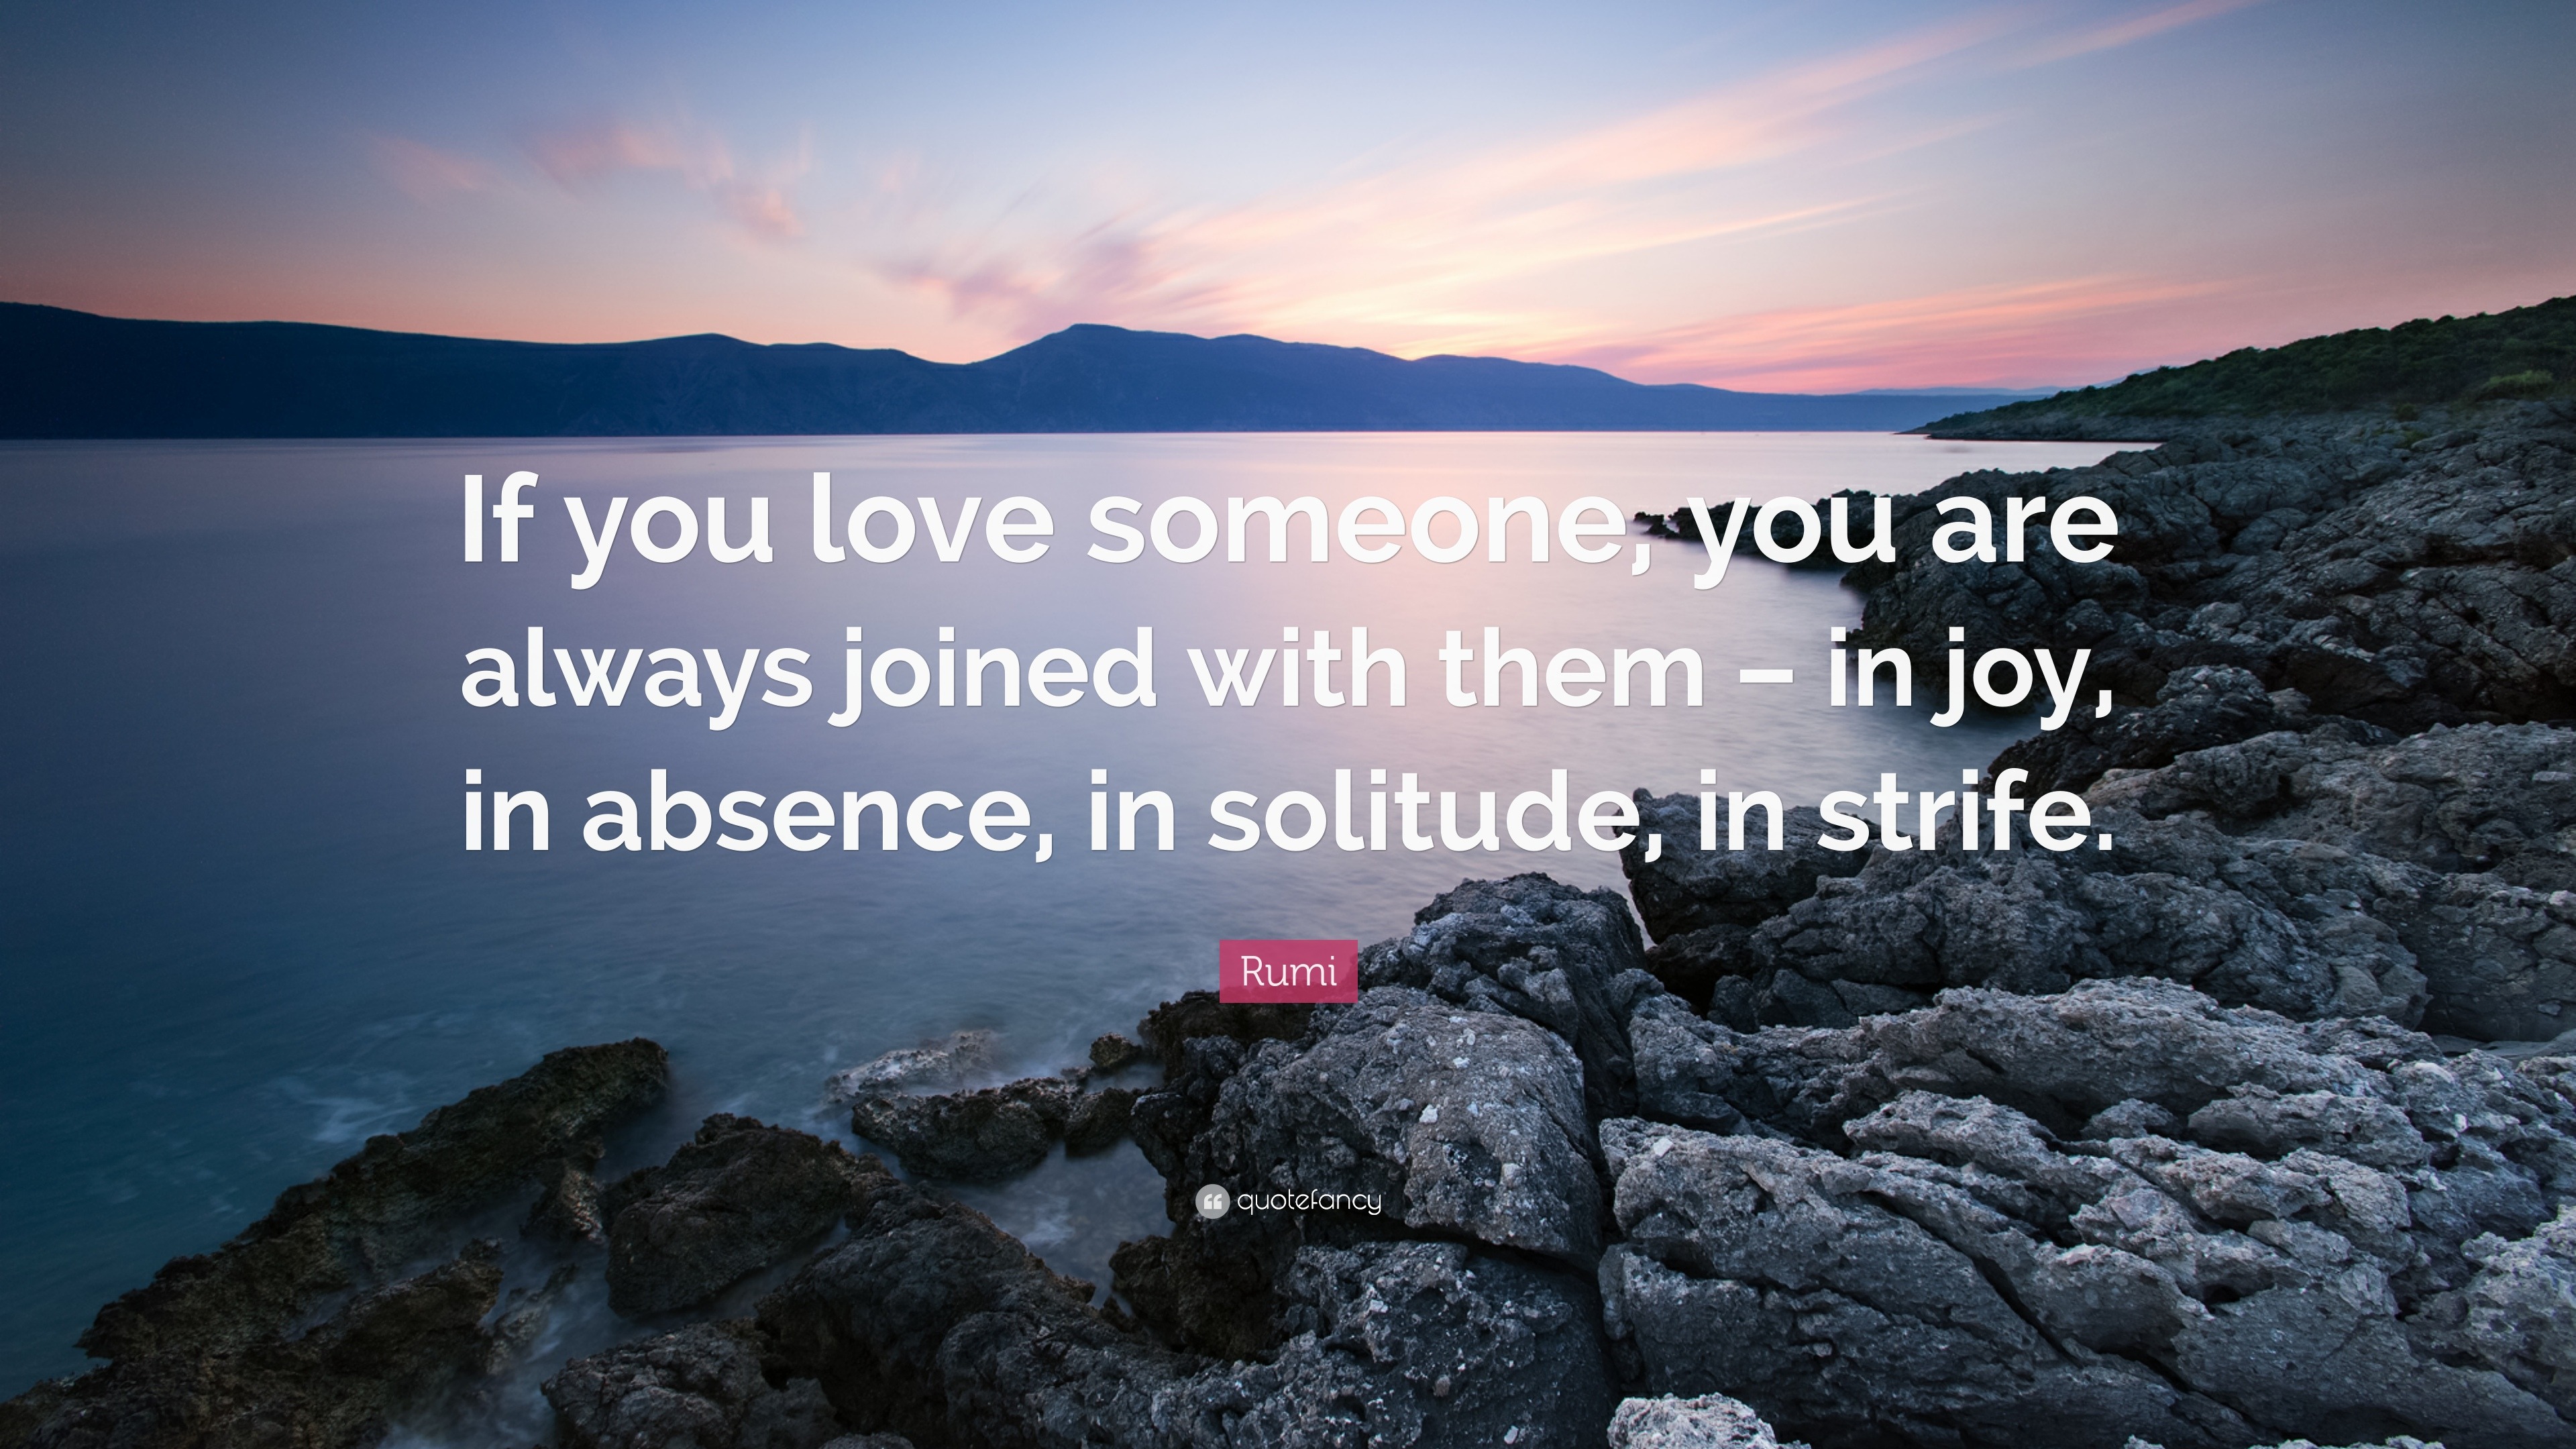 Rumi Quote “If you love someone you are always joined with them –